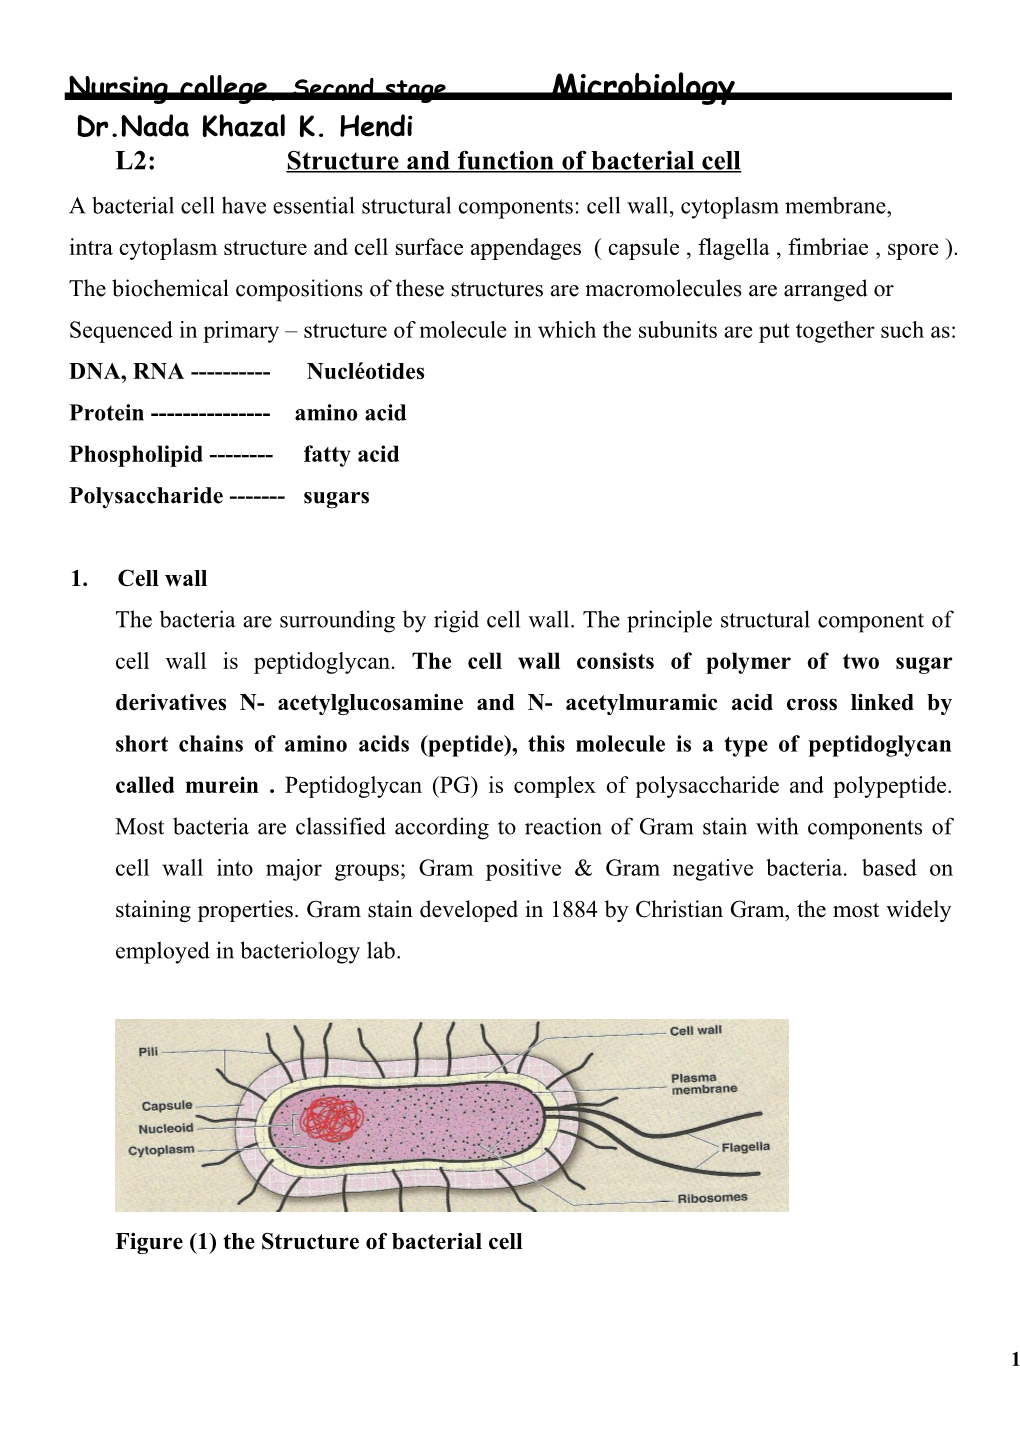 L2: Structure and Function of Bacterial Cell